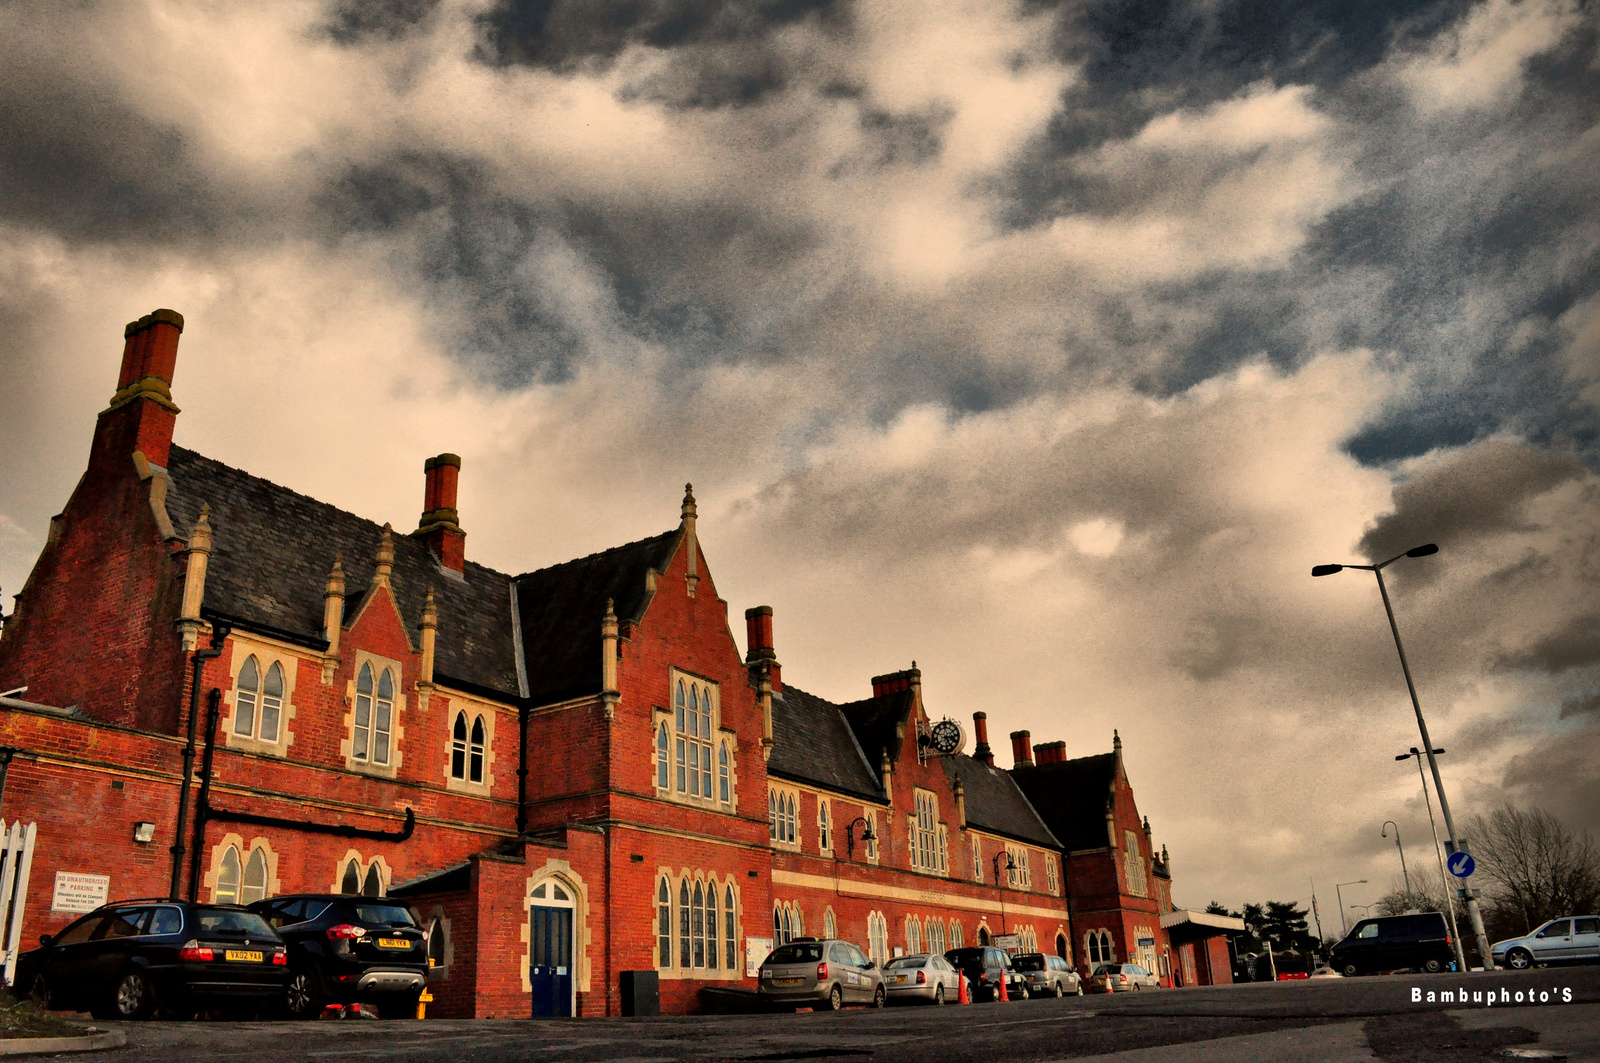 Train Station - Hereford-England